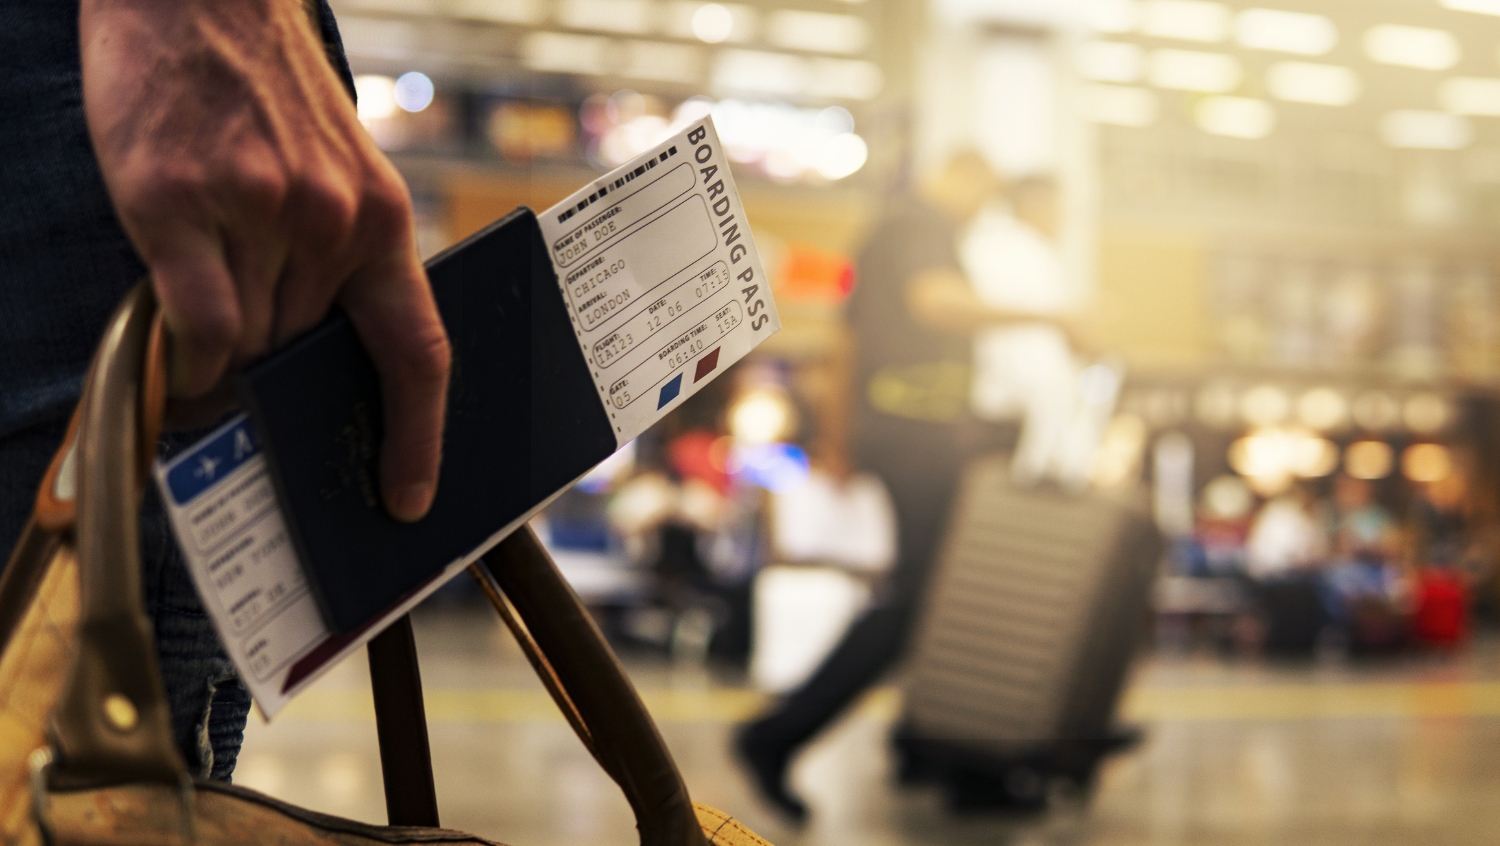 Boarding pass in hand, you can make your way through an airport by yourself with ease